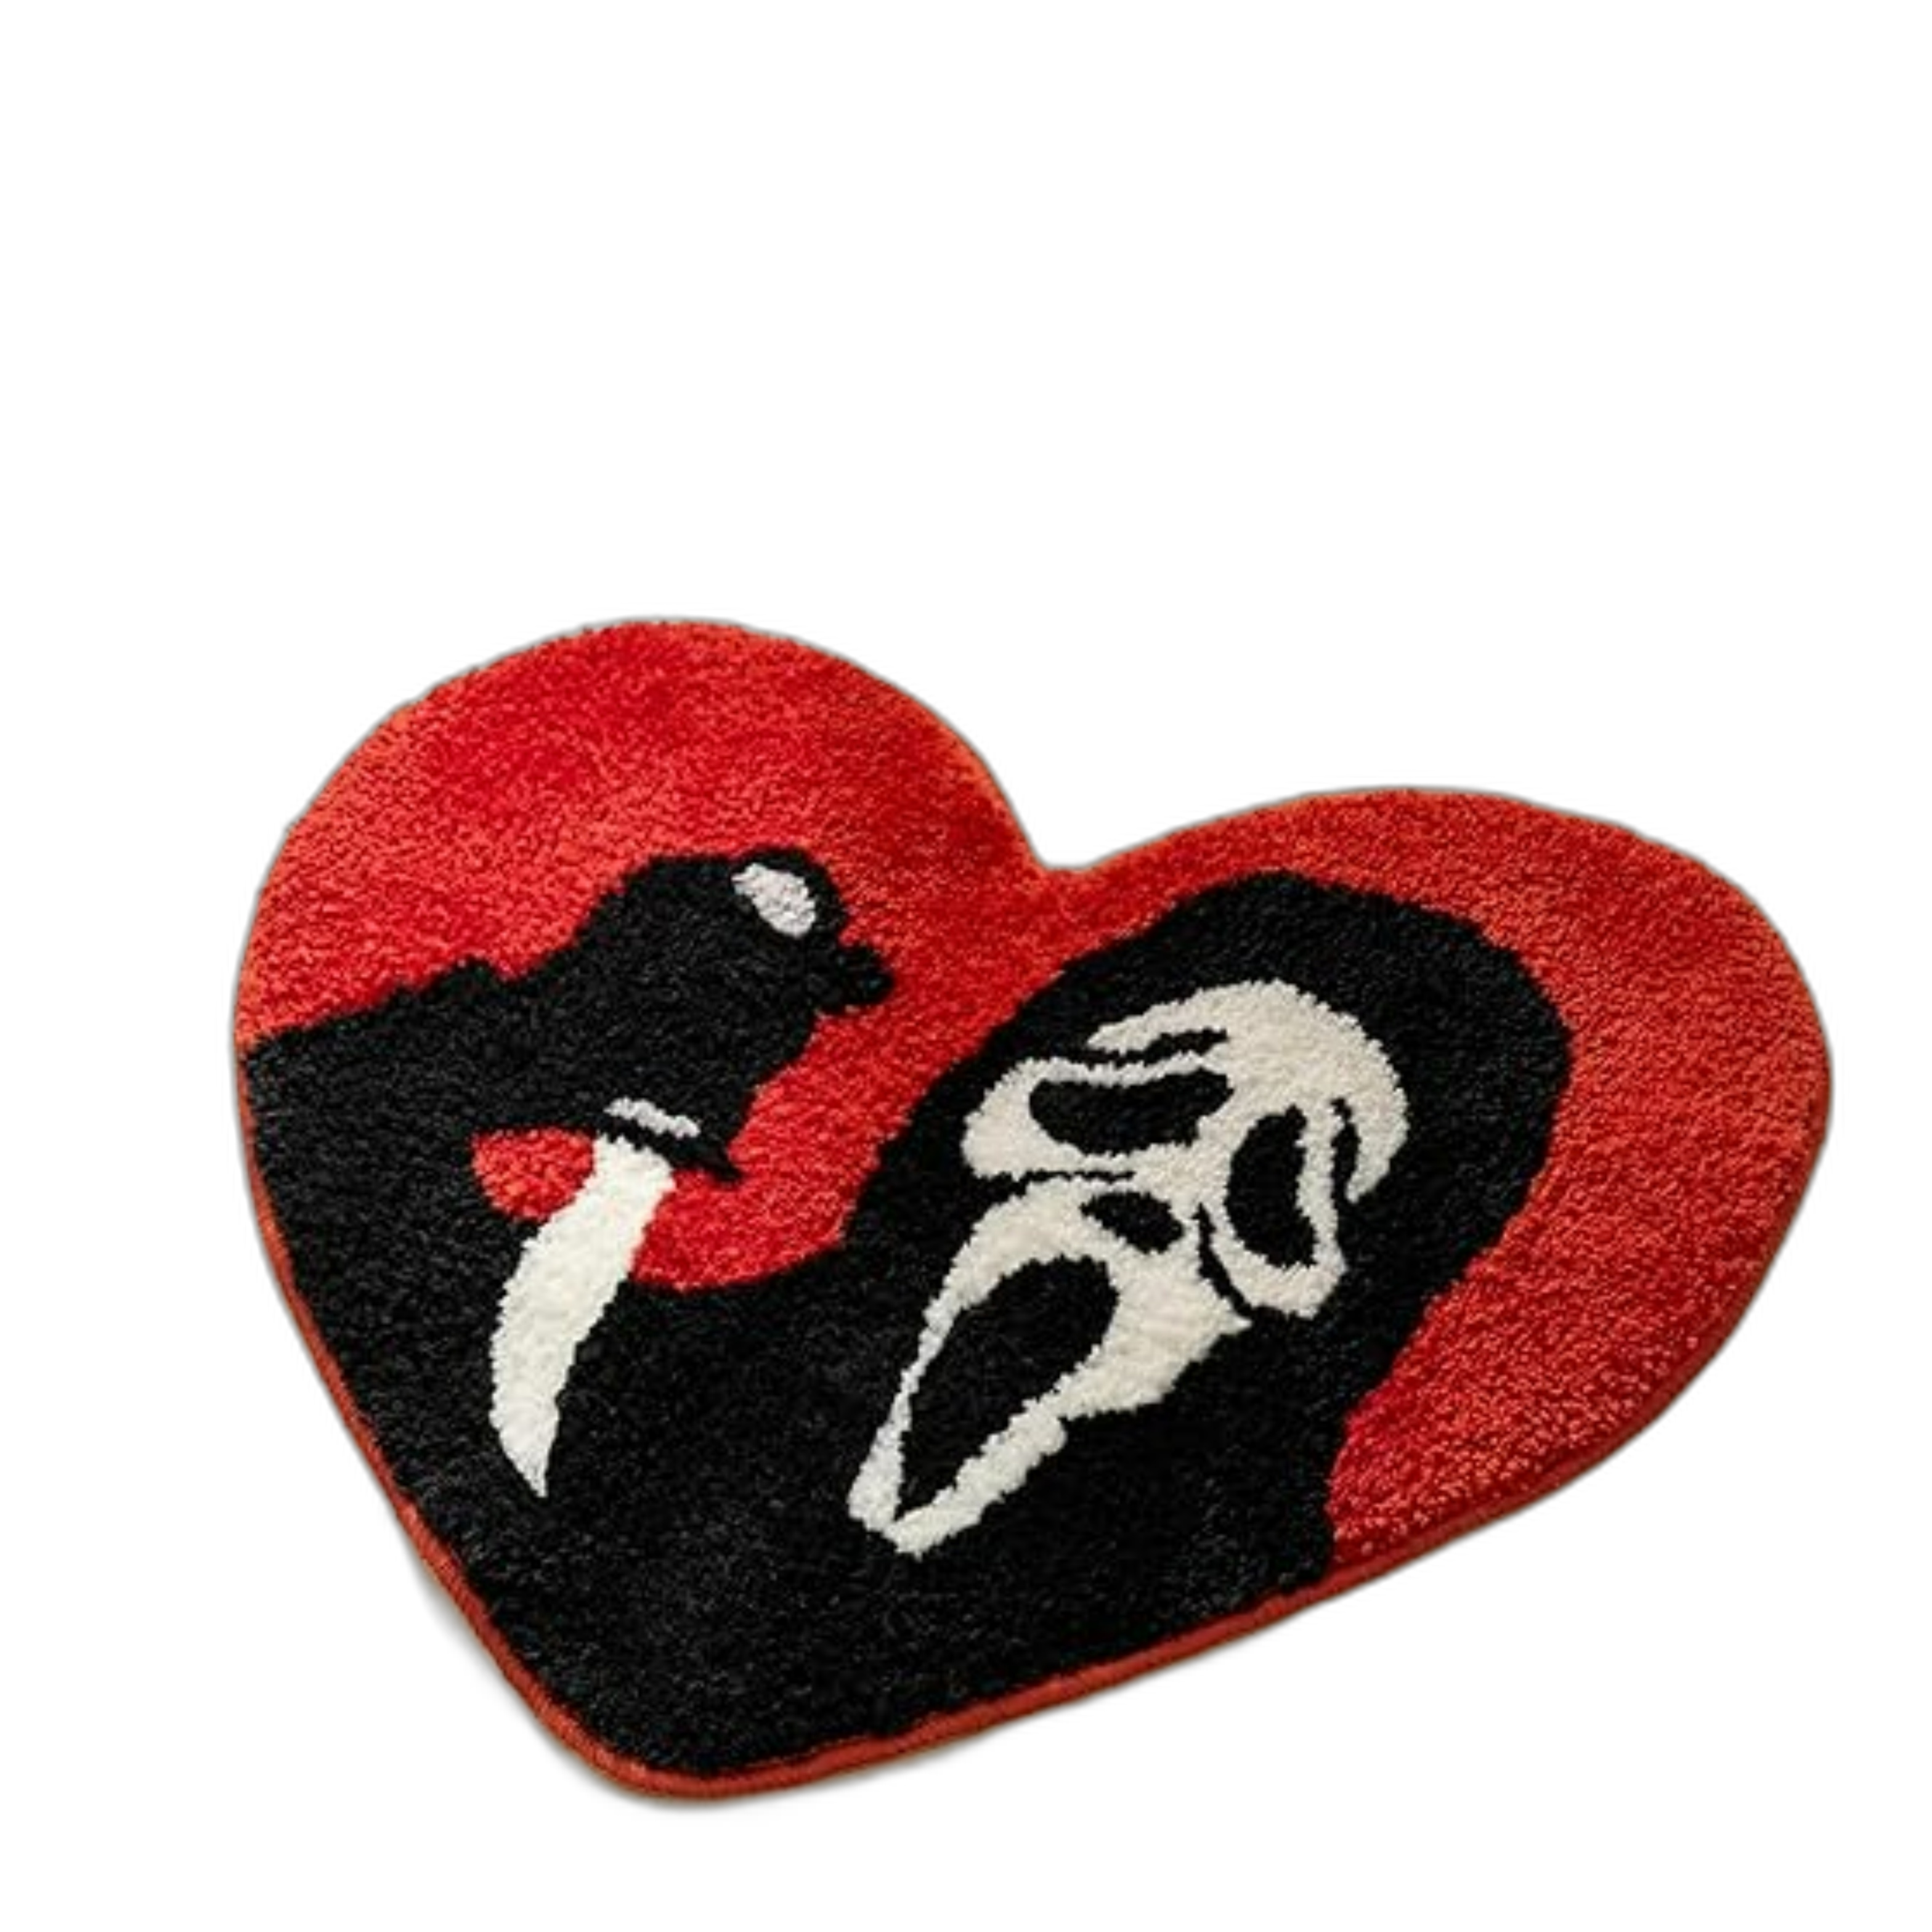 Red heart=shaped rug with a picture of ghostface, the killer from the Scream franchise.